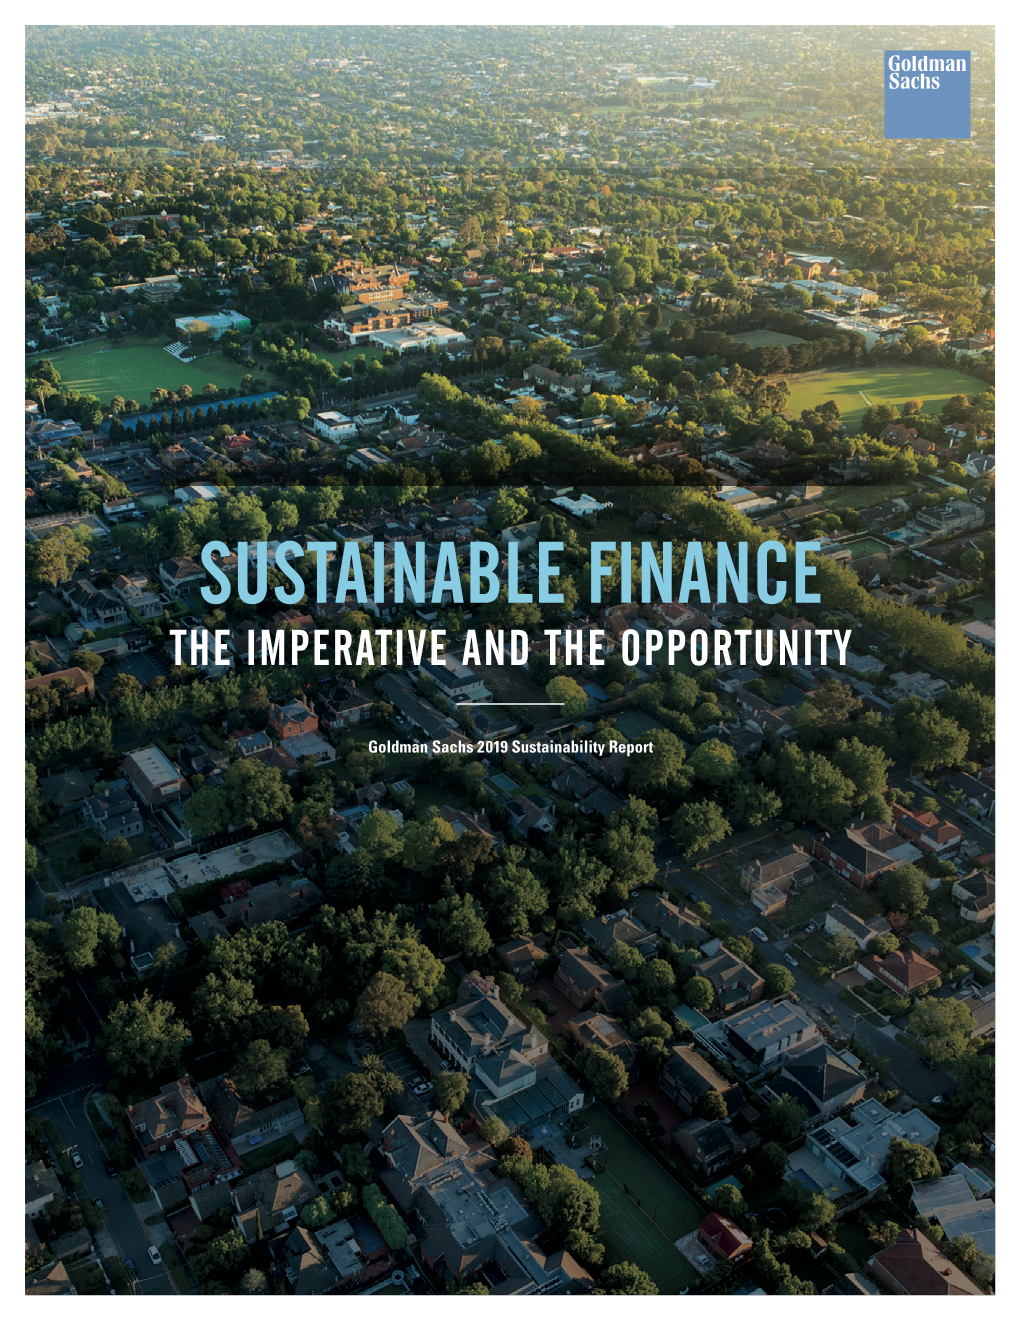 2019 Sustainability Report Goldman Sachs 2019 Sustainability Report CONTENTS